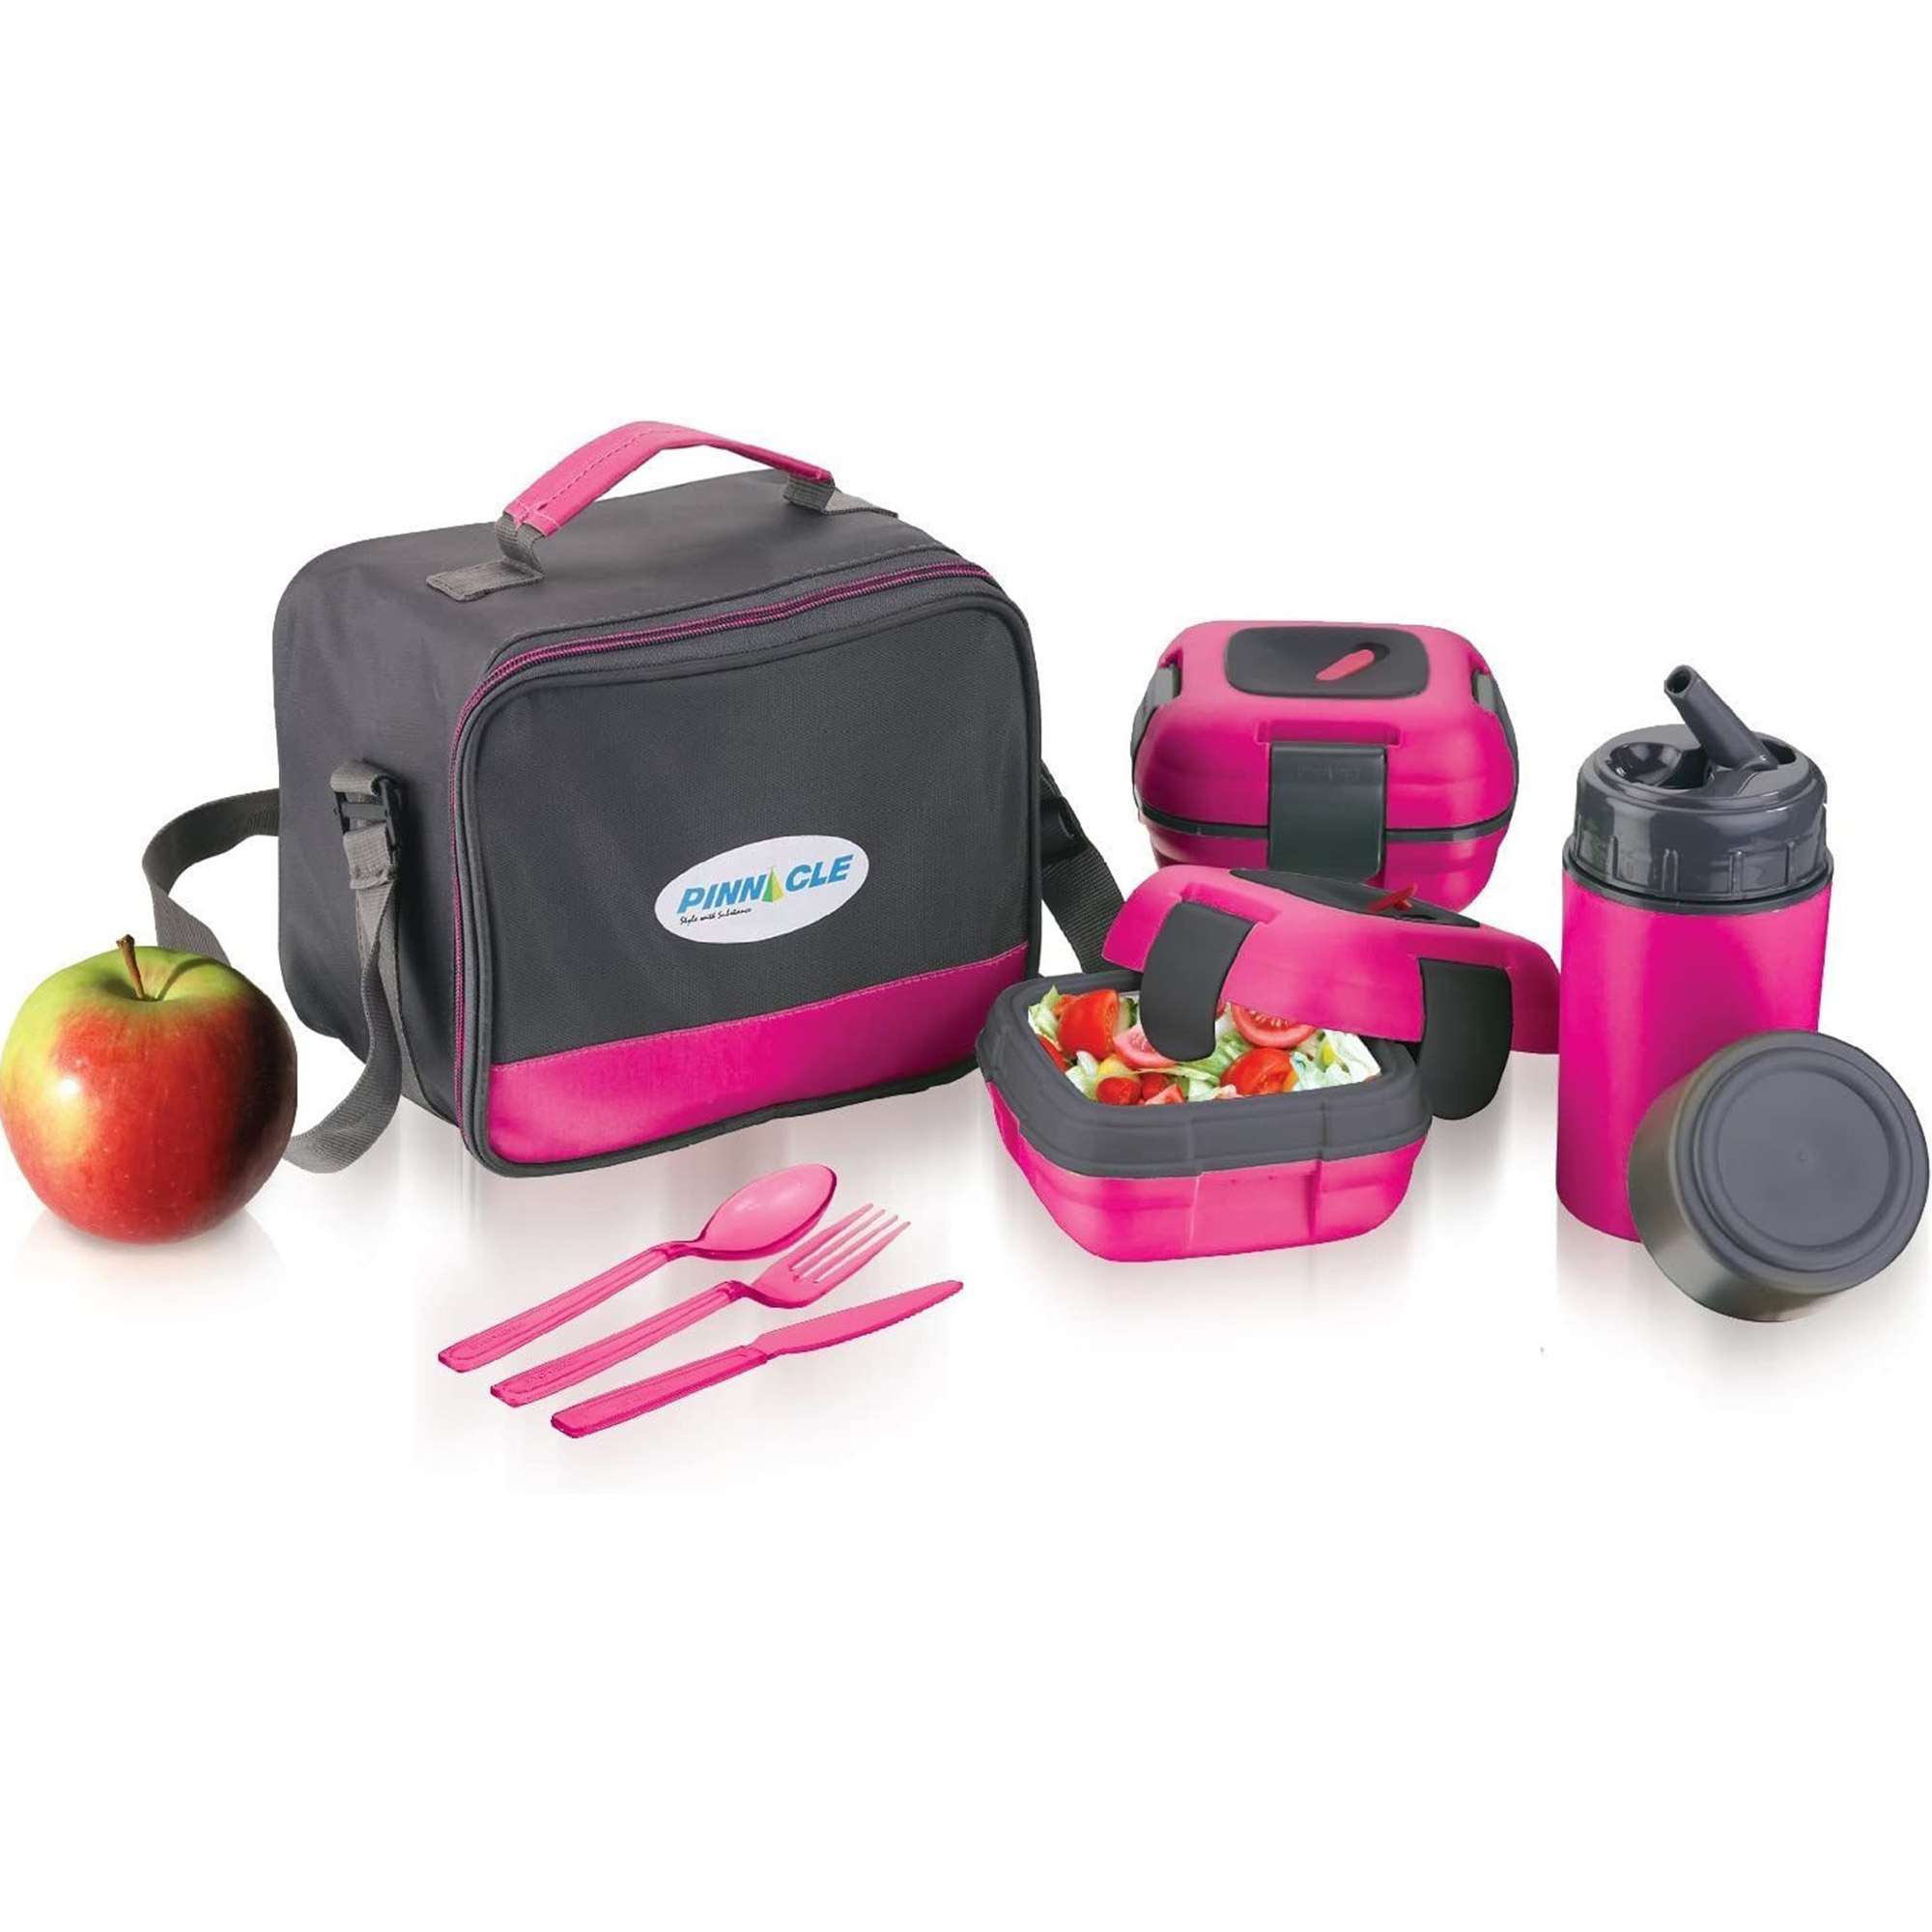 Pinnacle Thermoware Thermal Lunch Box Set Lunch Containers for Adults & Kids, Pink - image 1 of 9